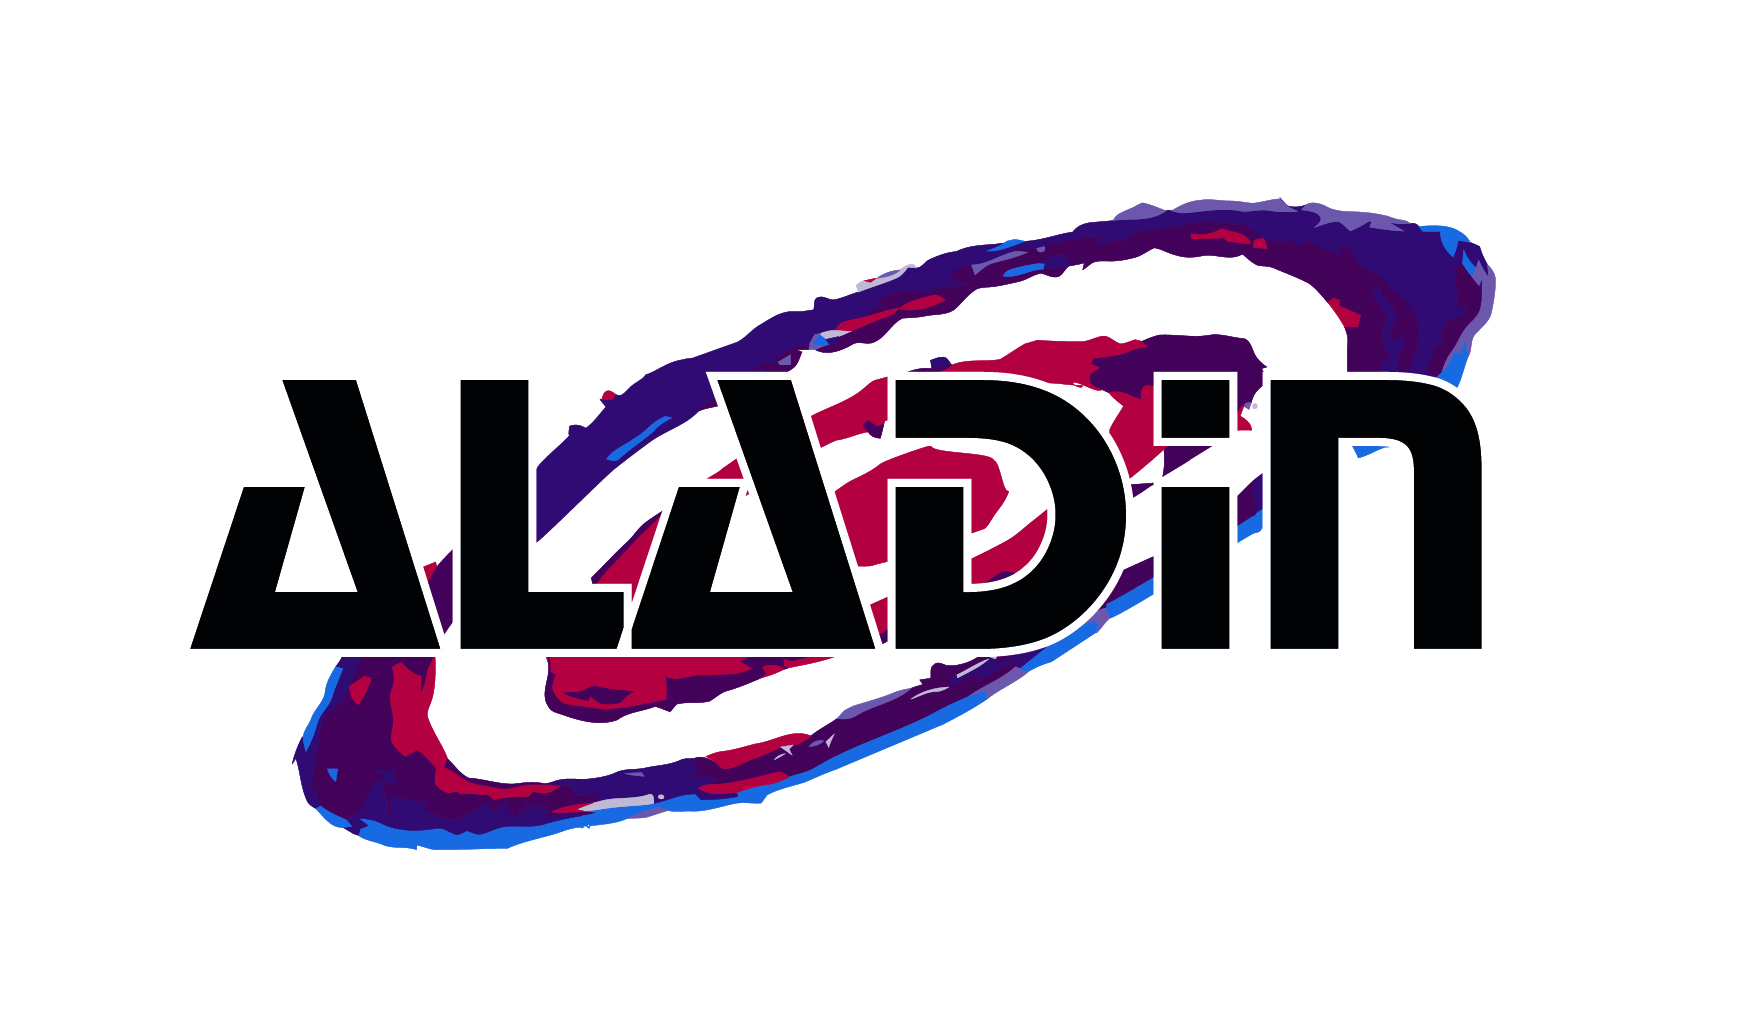 Aladin - The interactive software sky atlas for access, visualization and analysis of astronomical images, surveys, catalogues, databases and related data